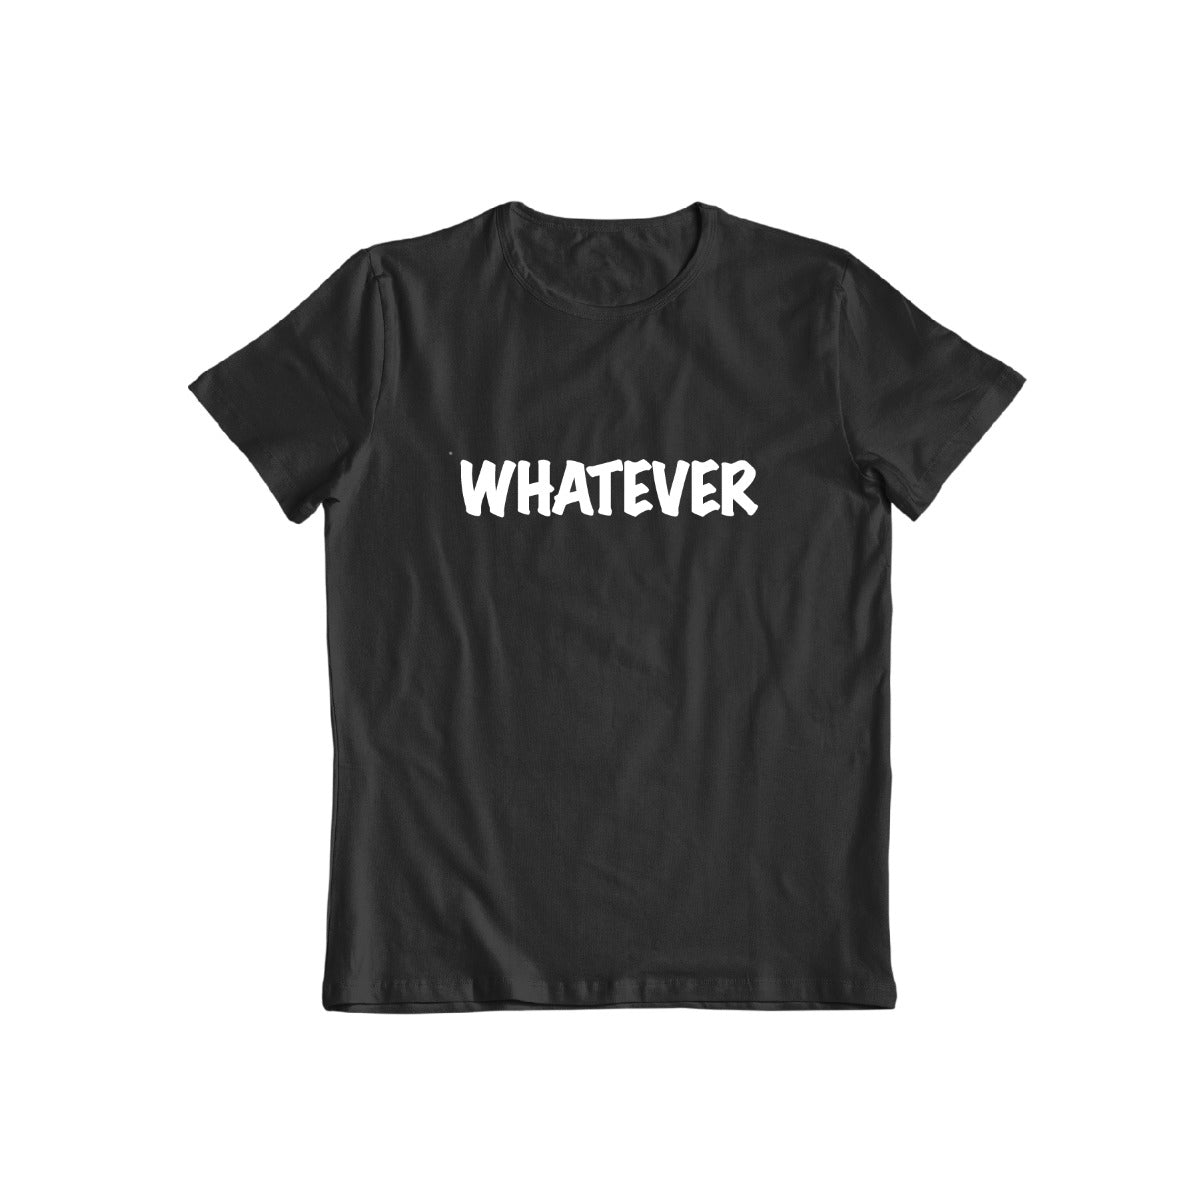 Whatever T-Shirt for Men and Women / Black / Small